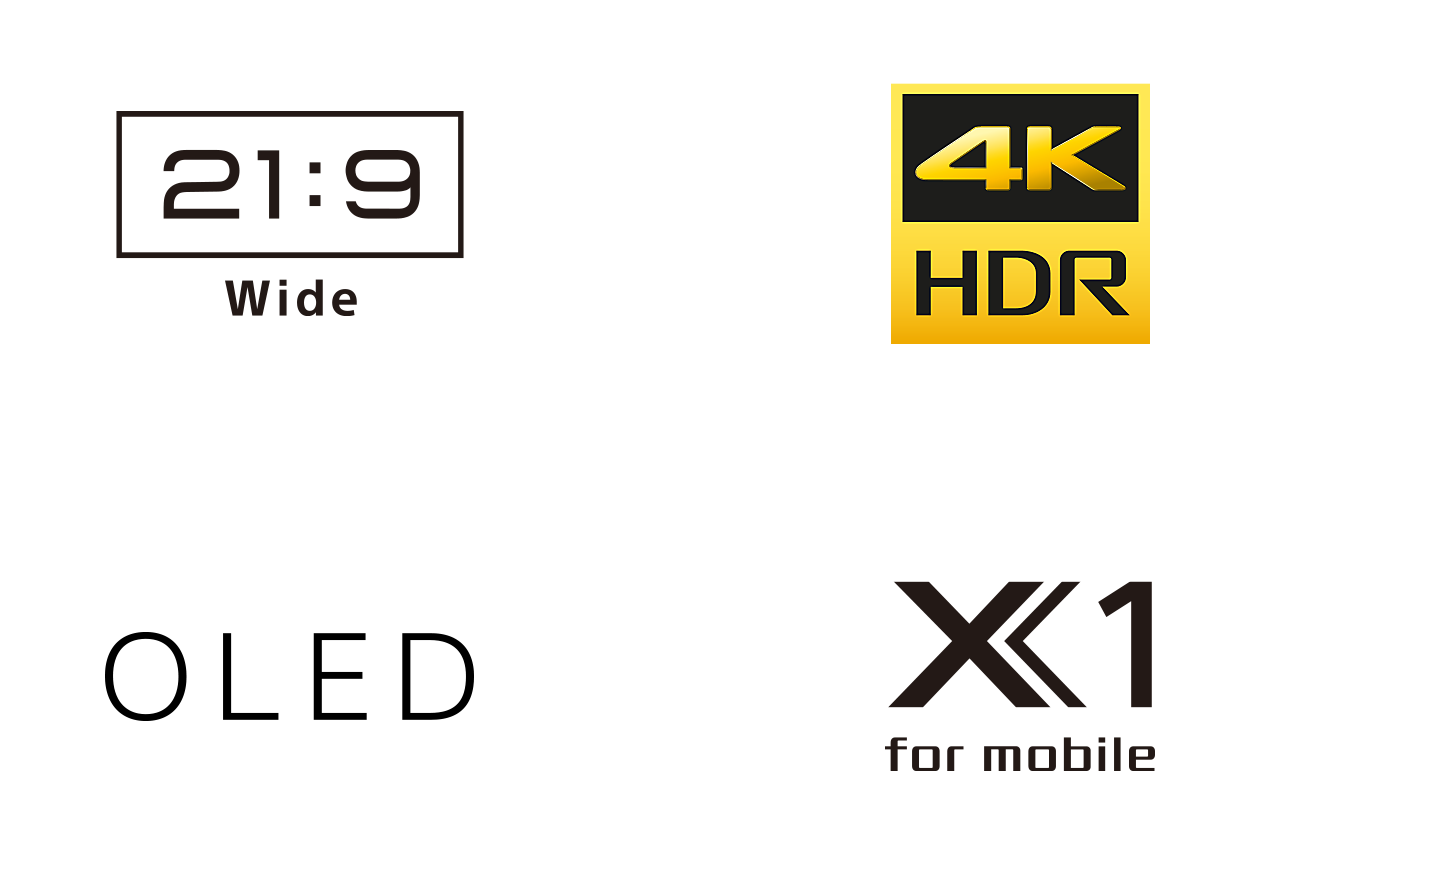 Loghi 21:9 Wide, 4K HDR, OLED e X1 for mobile